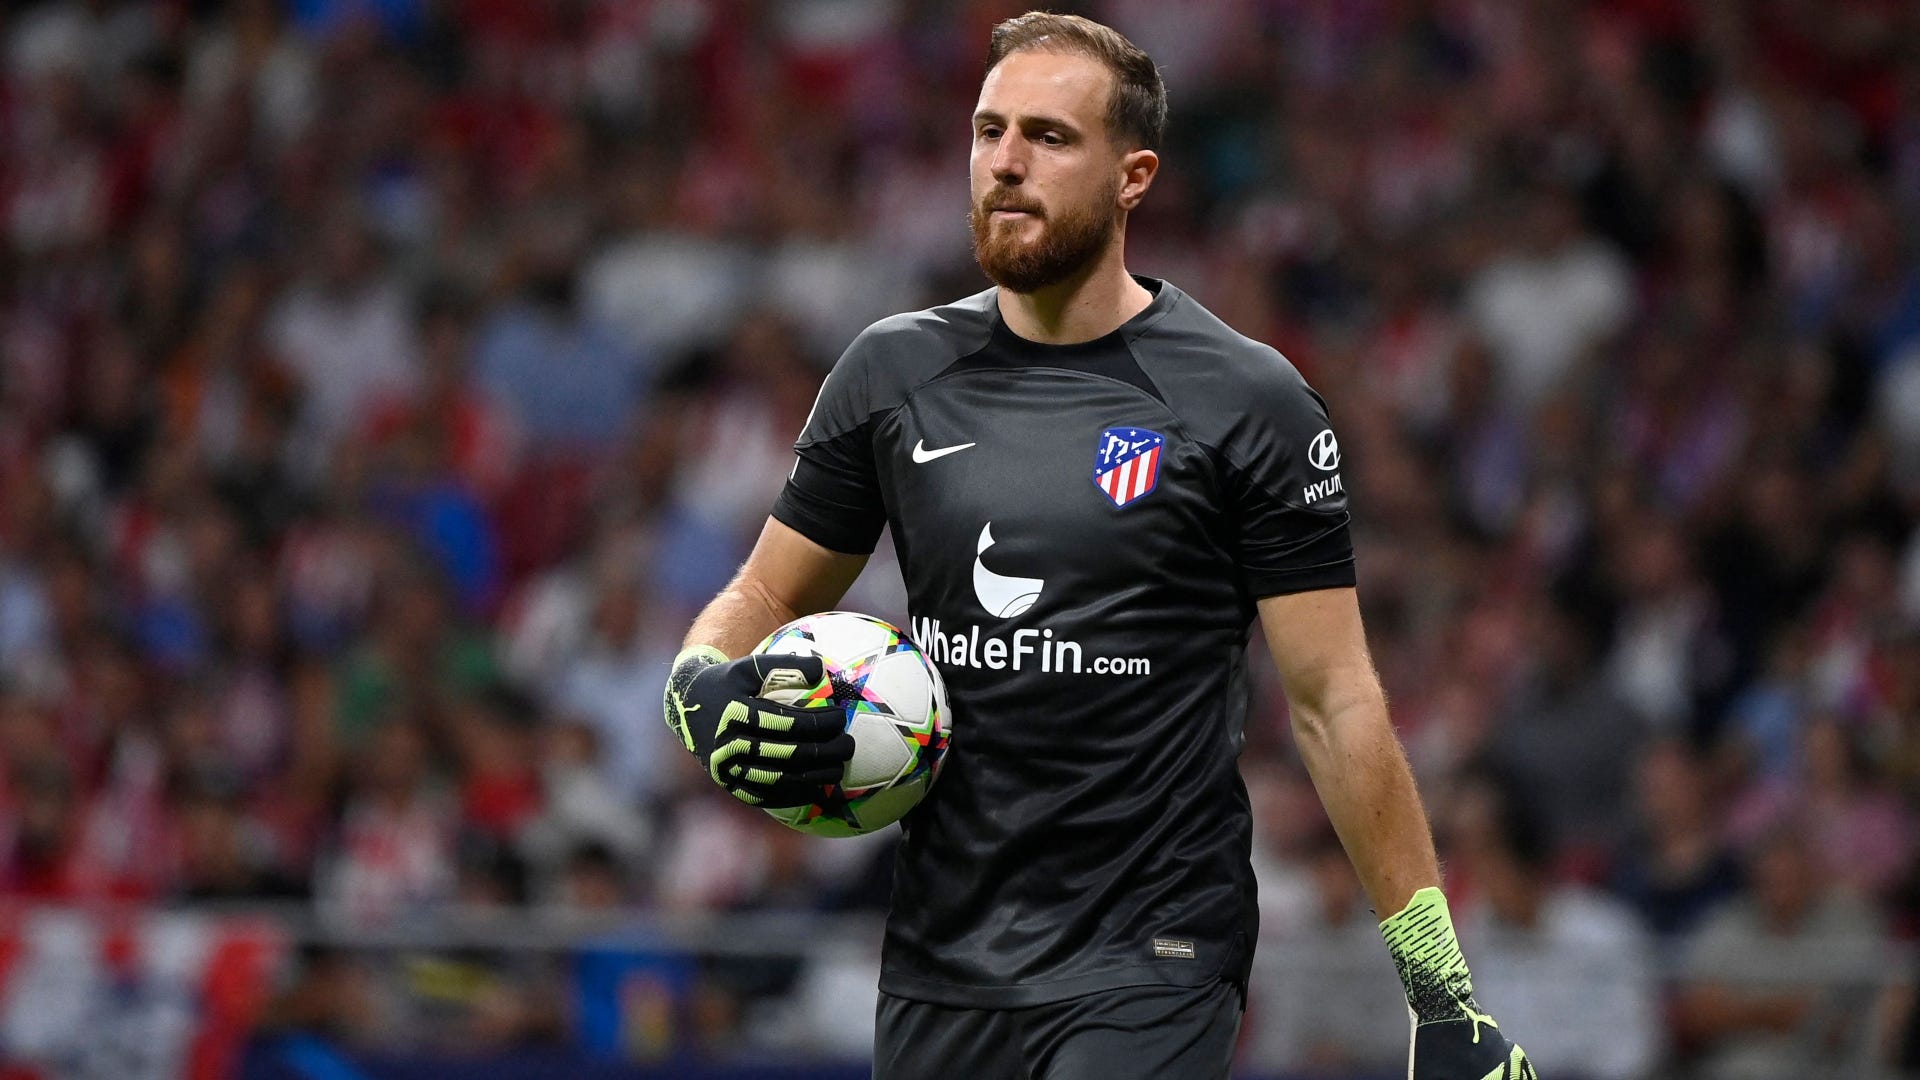 Atletico Madrid goalkeeper Jan Oblak potentially facing surgery on persistent injury